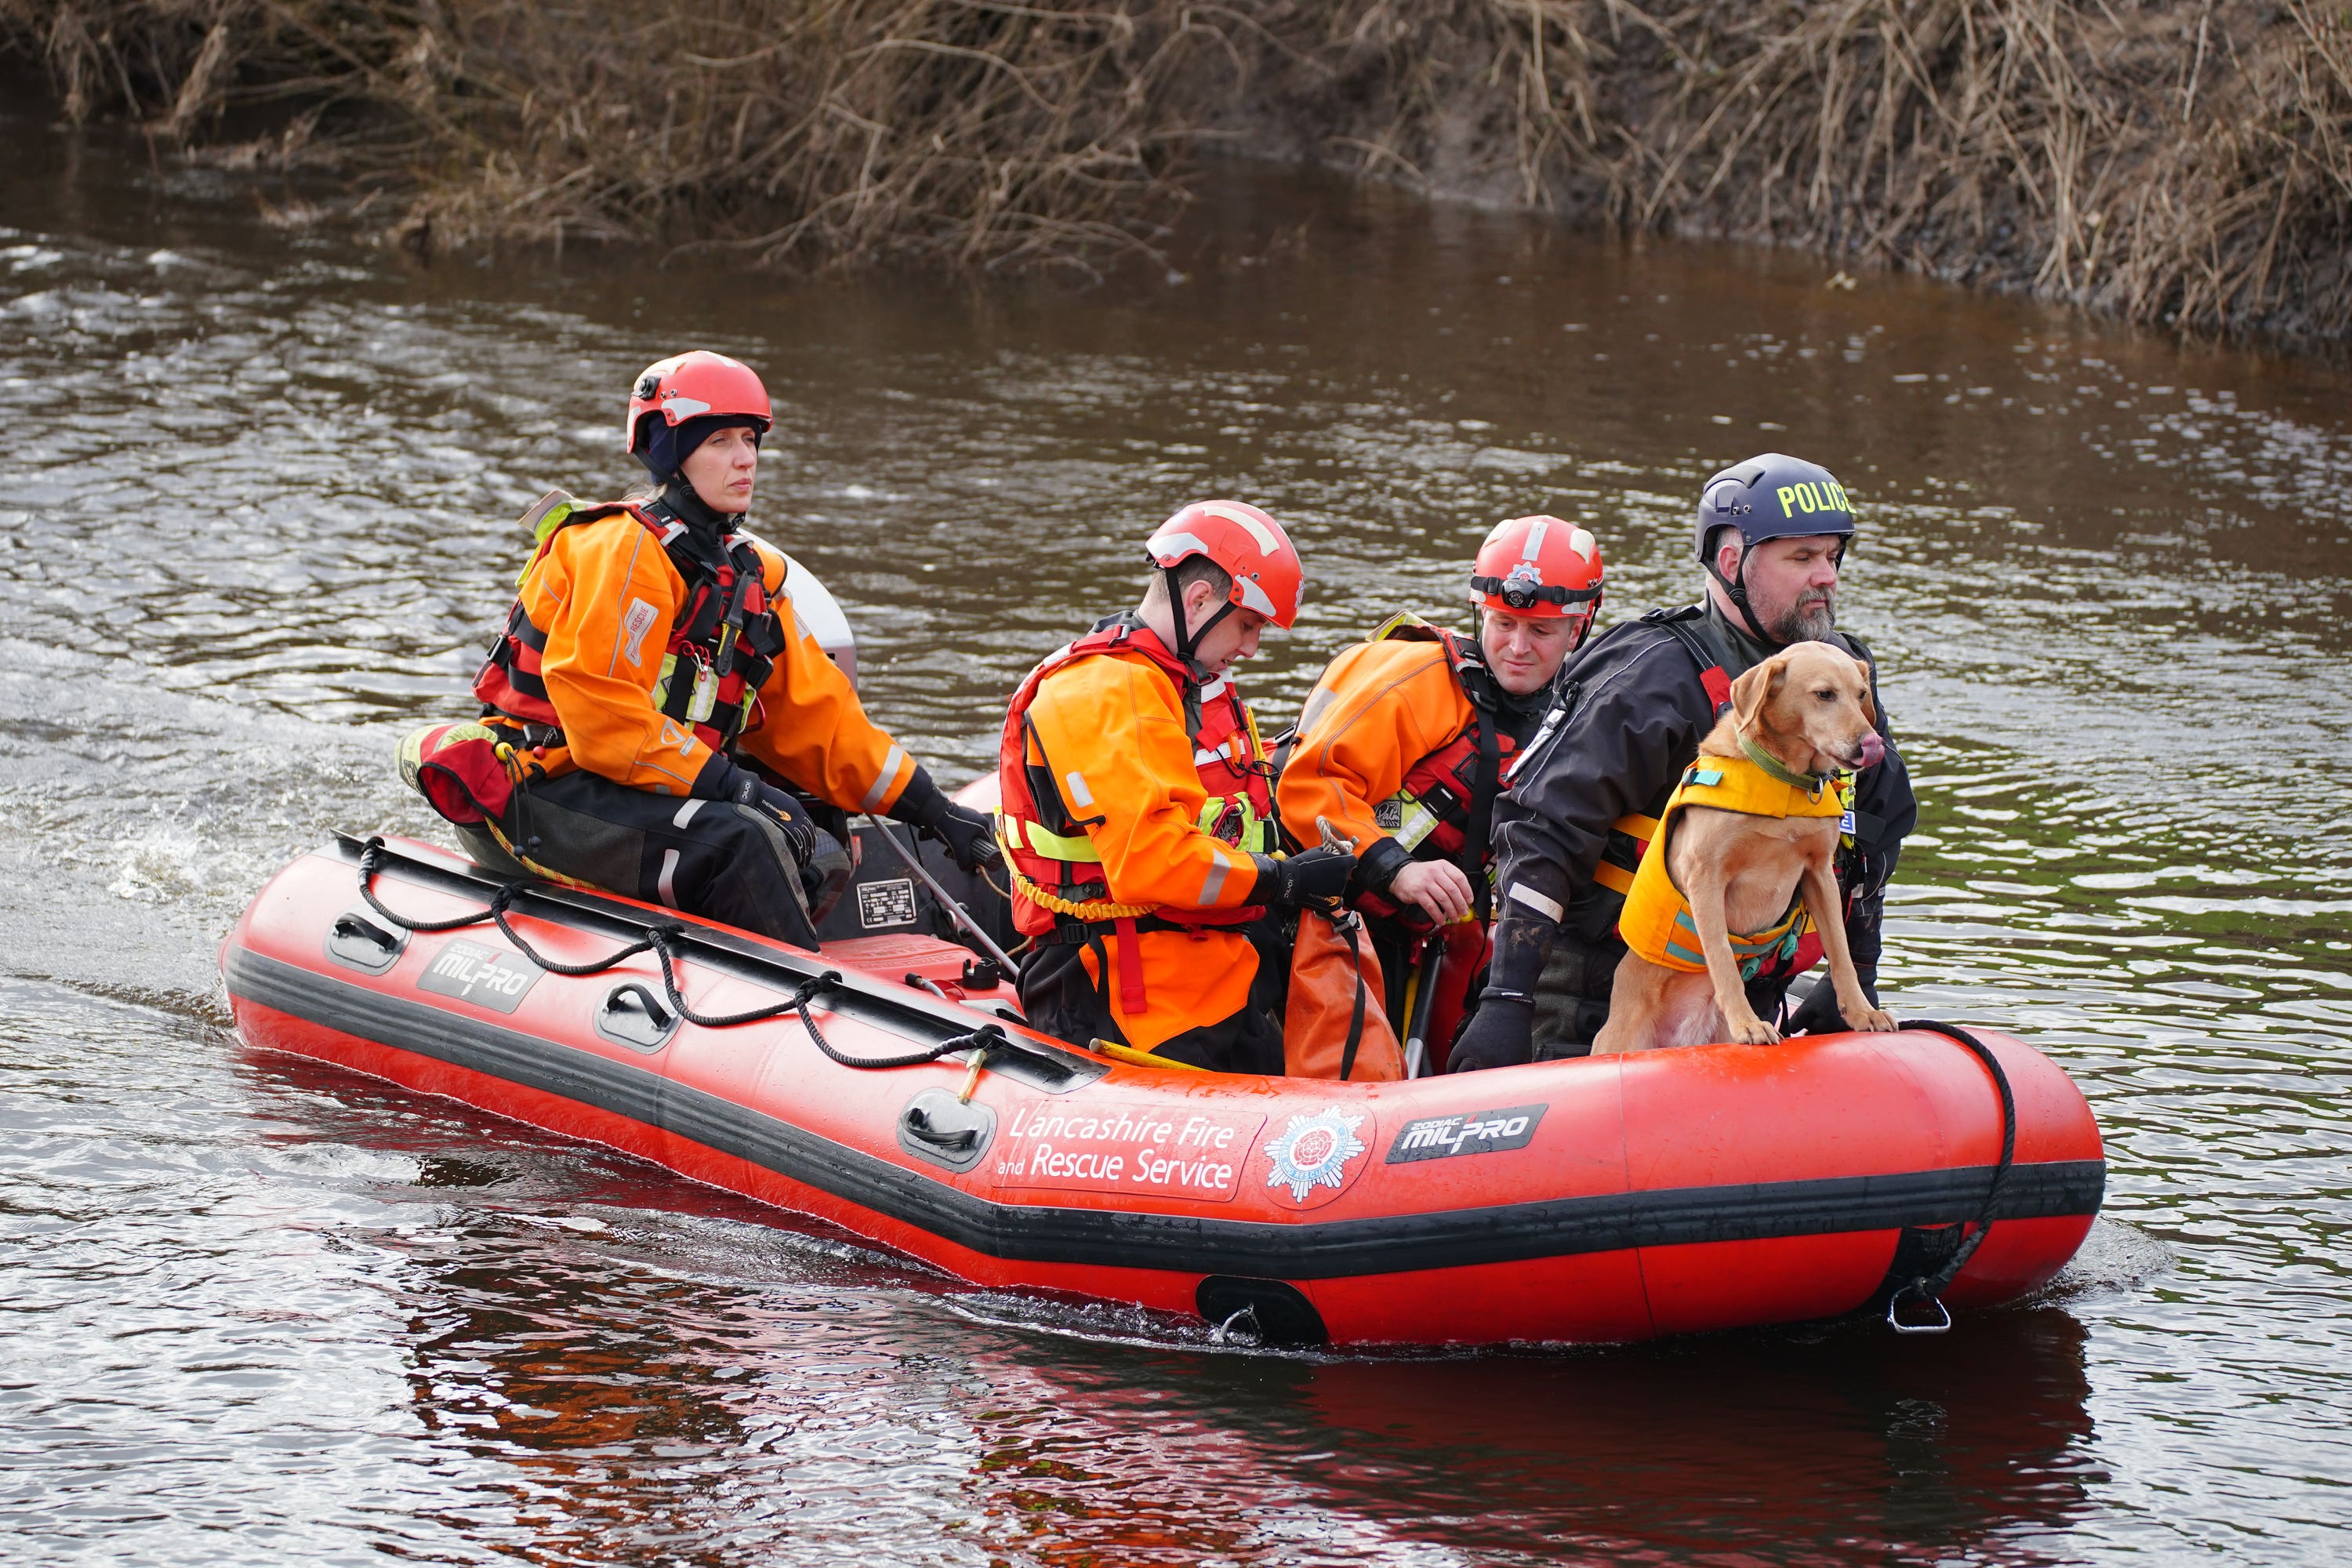 Specialist search teams from Lancashire Fire and Rescue Service and the police, on the River Wyre